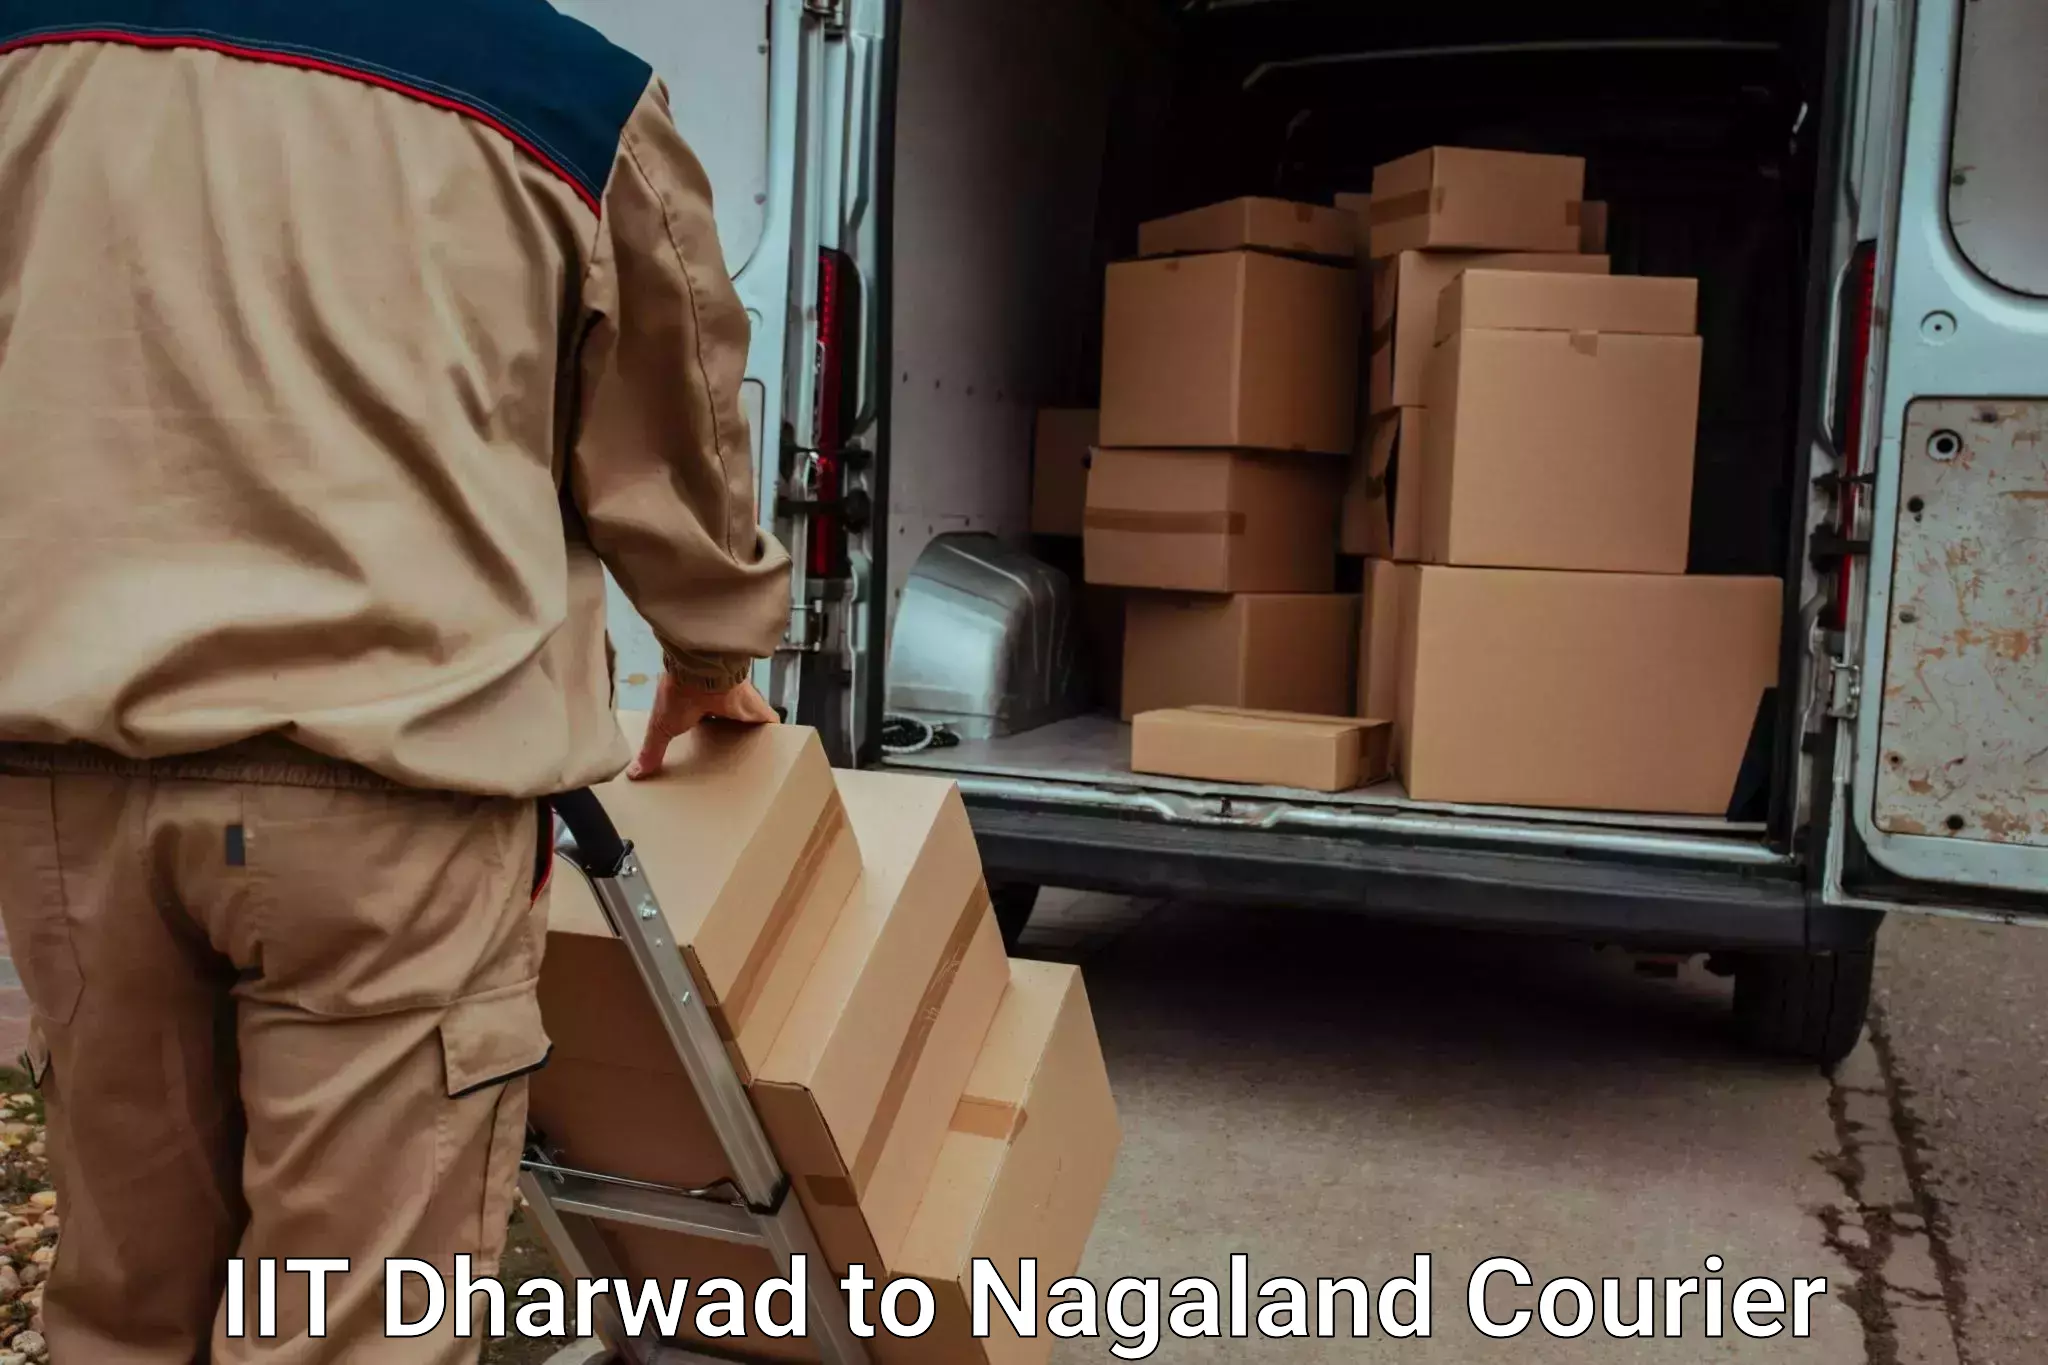 Same day baggage transport in IIT Dharwad to NIT Nagaland